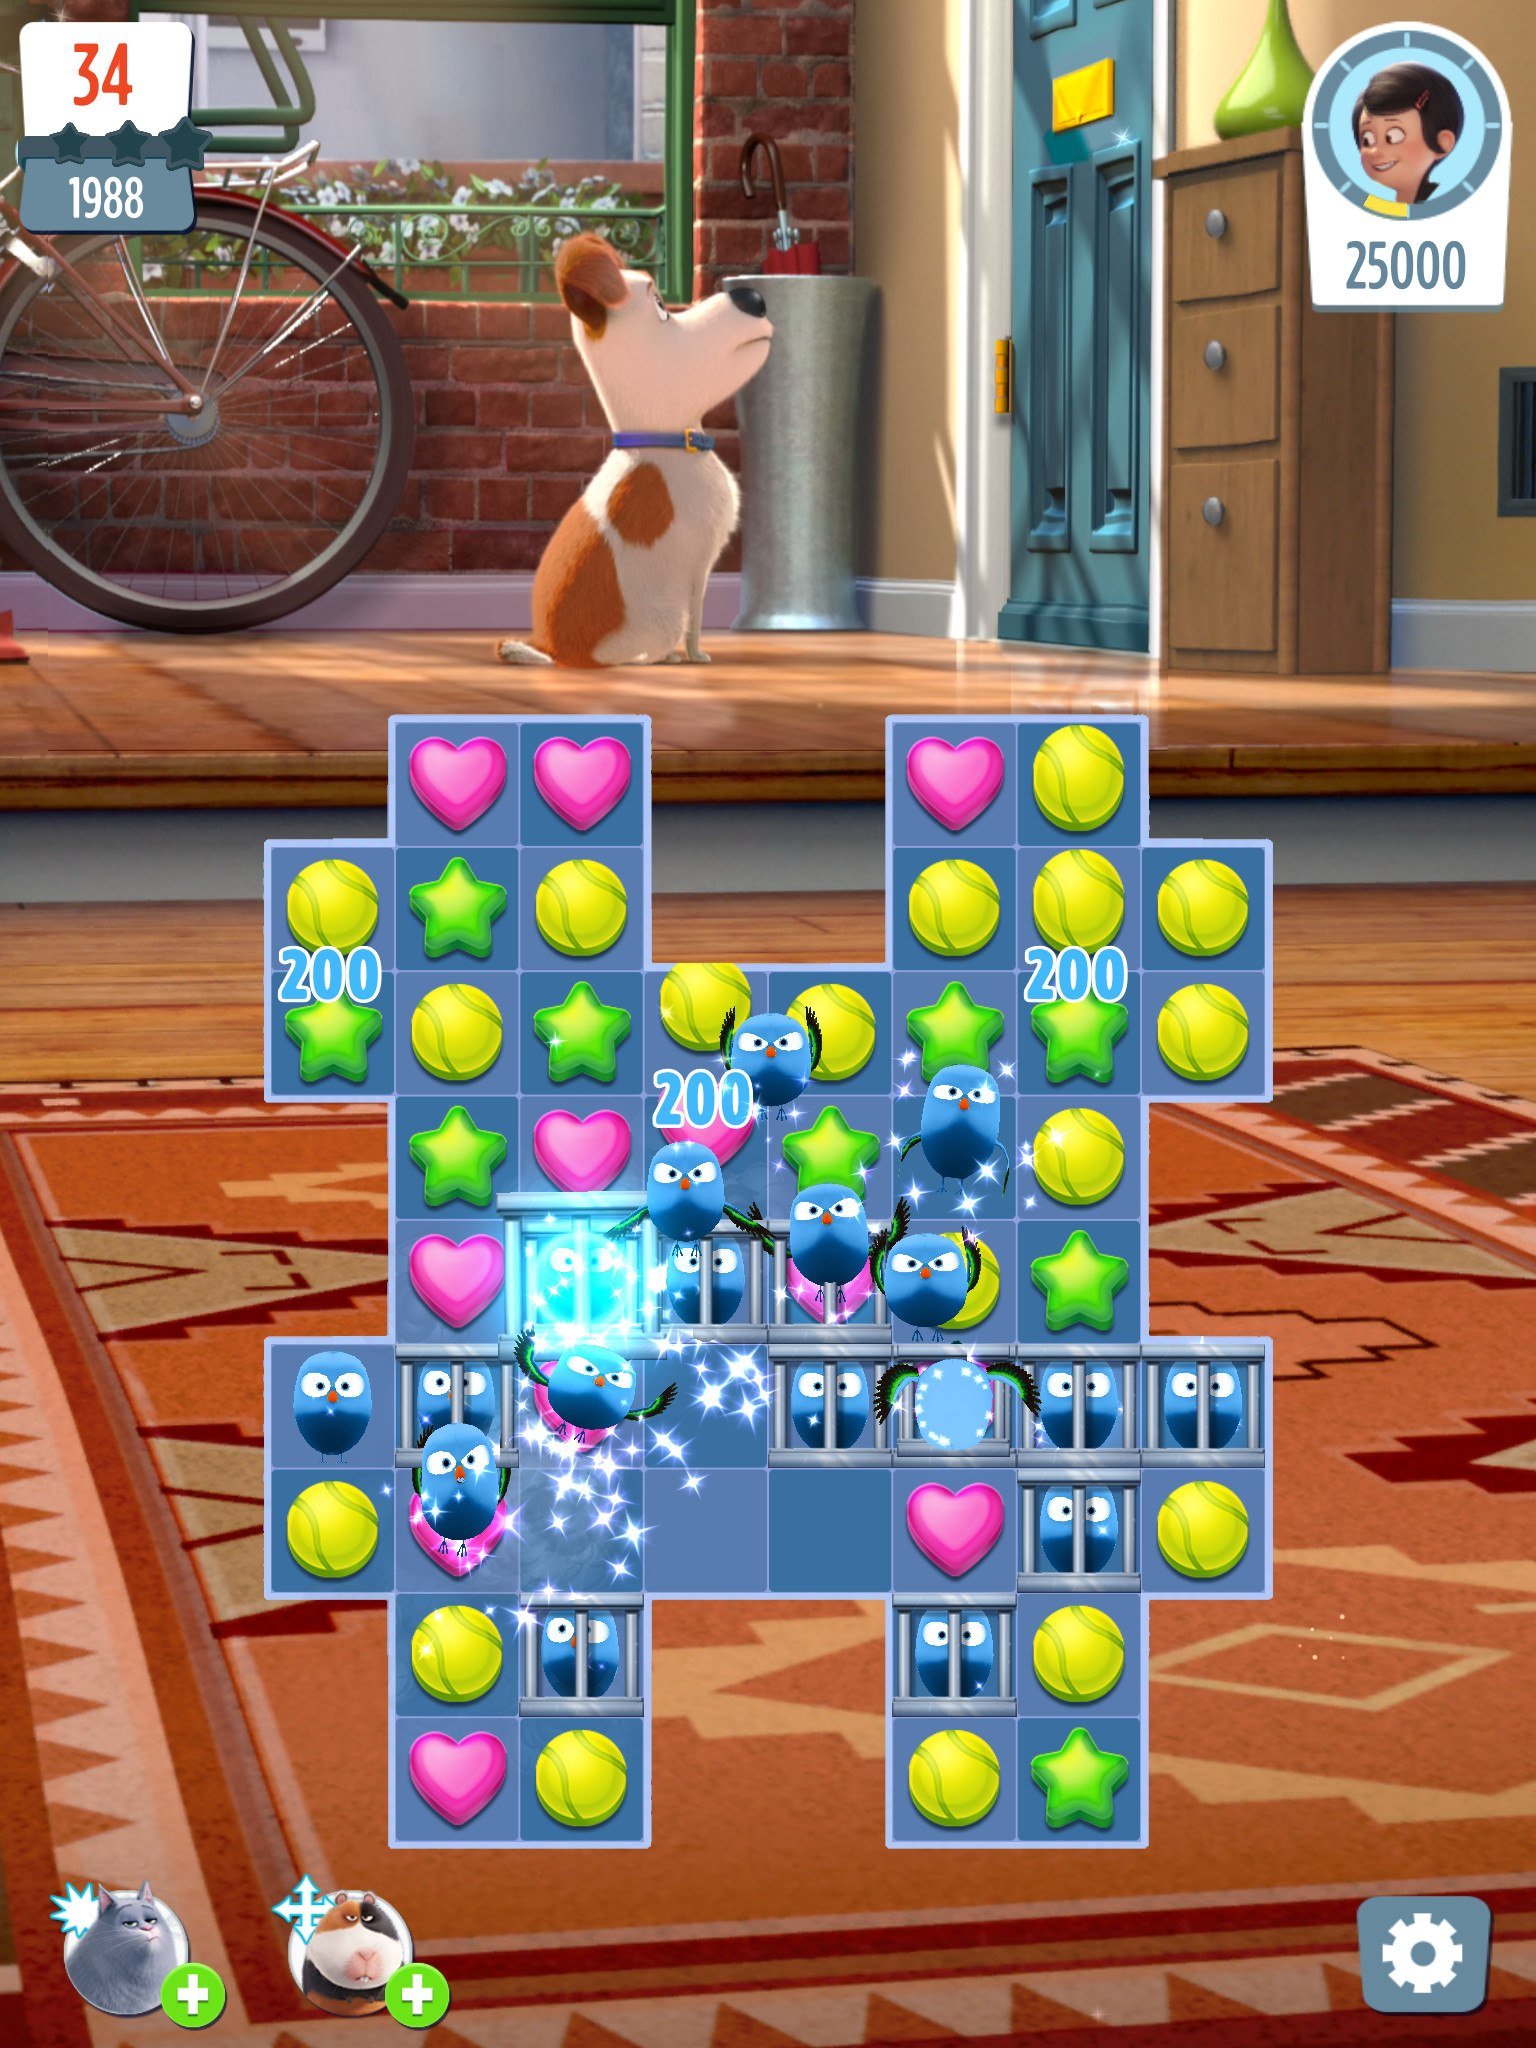 The Secret Life of Pets: Unleashed Tips, Cheats and Strategies